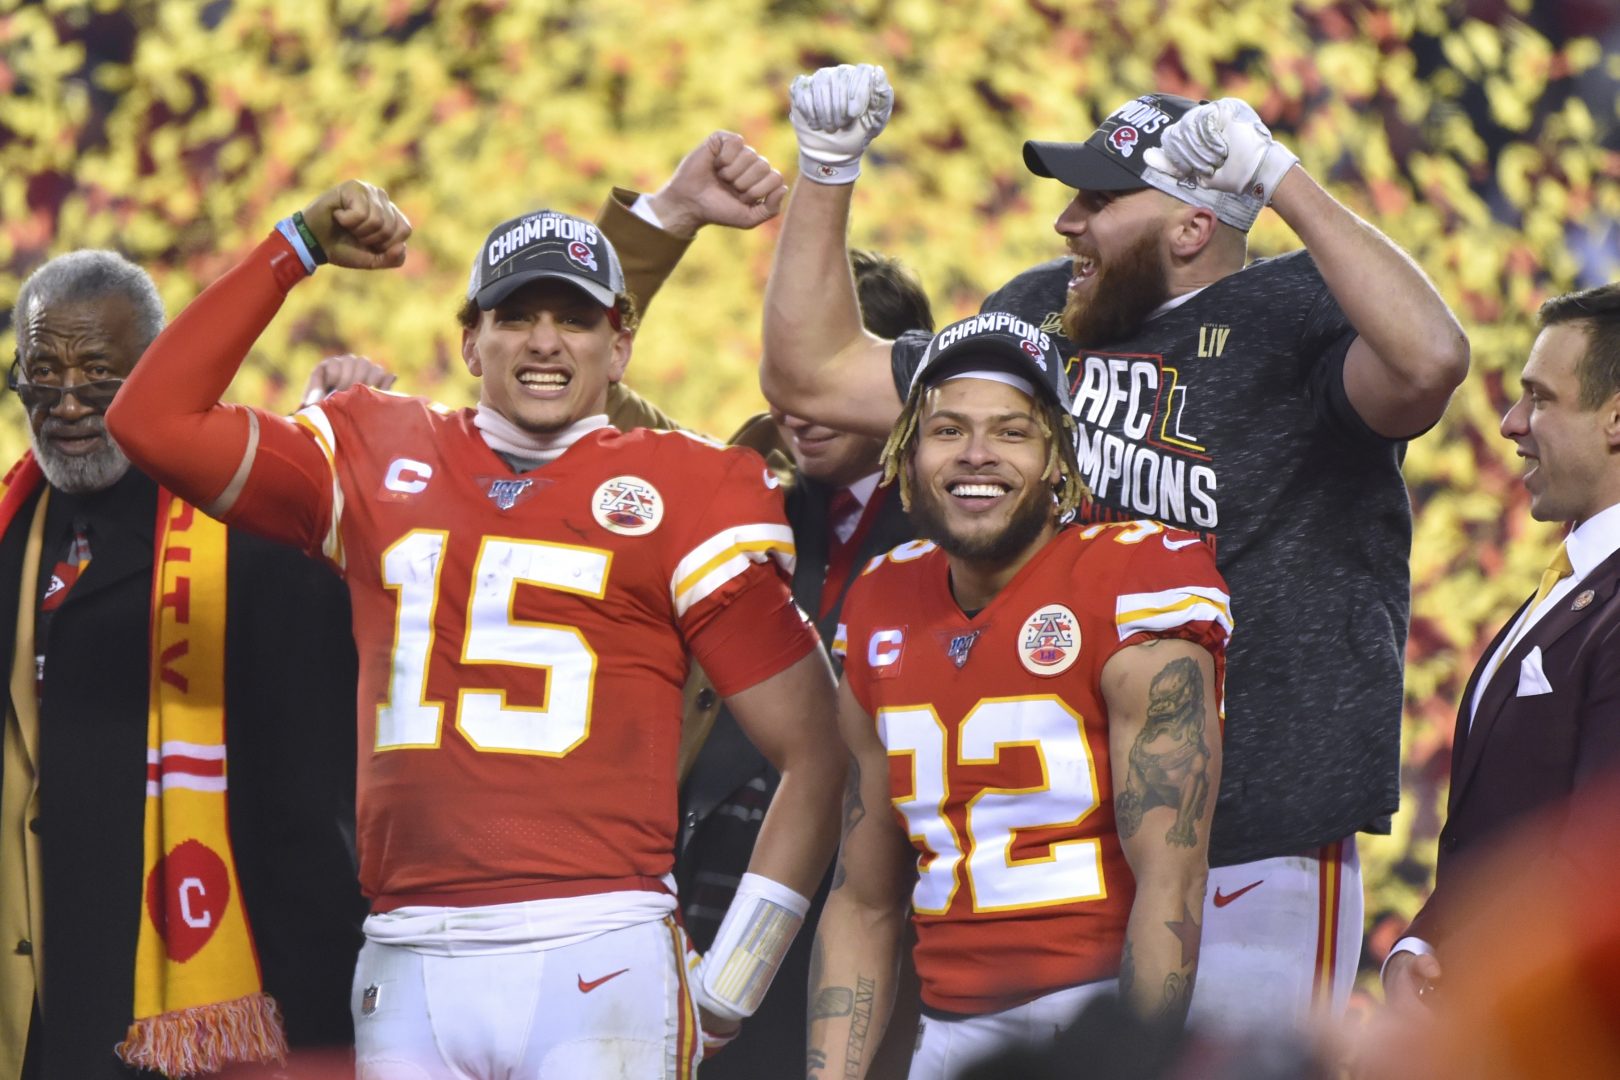 The Kansas City Chiefs celebrate Super Bowl win during hometown